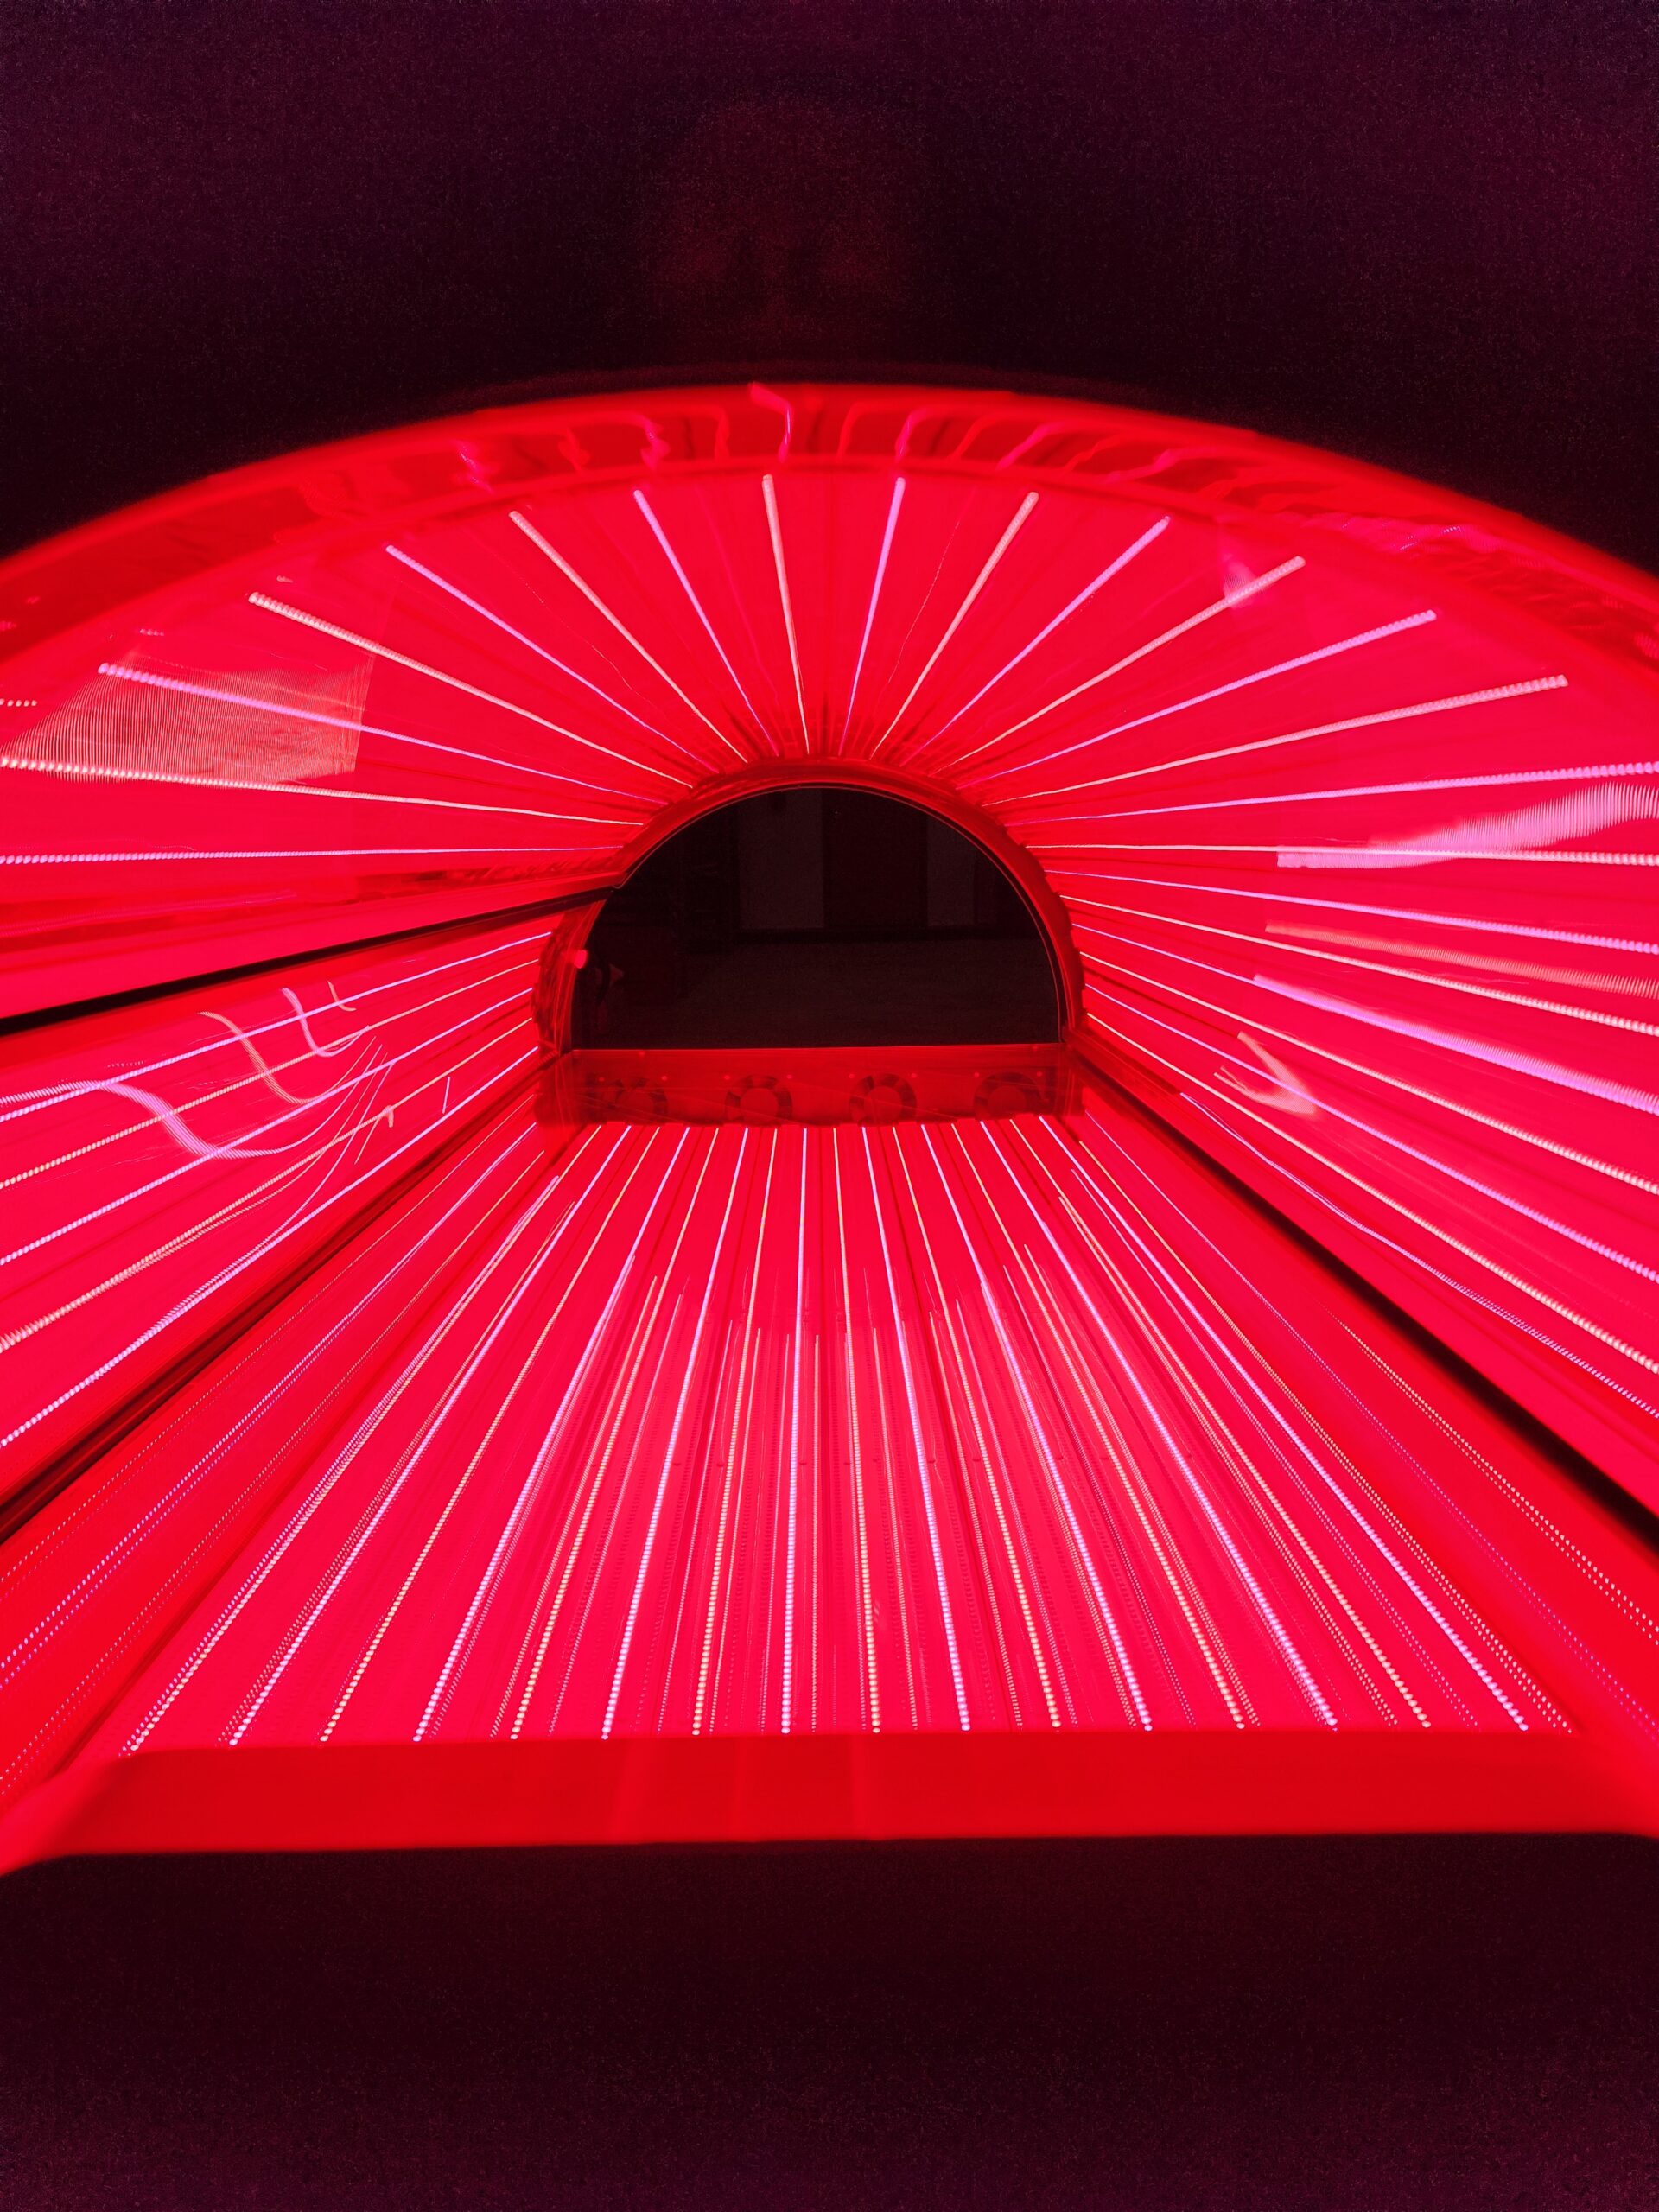 Improve Your Skin Pigmentation with Red Light Therapy